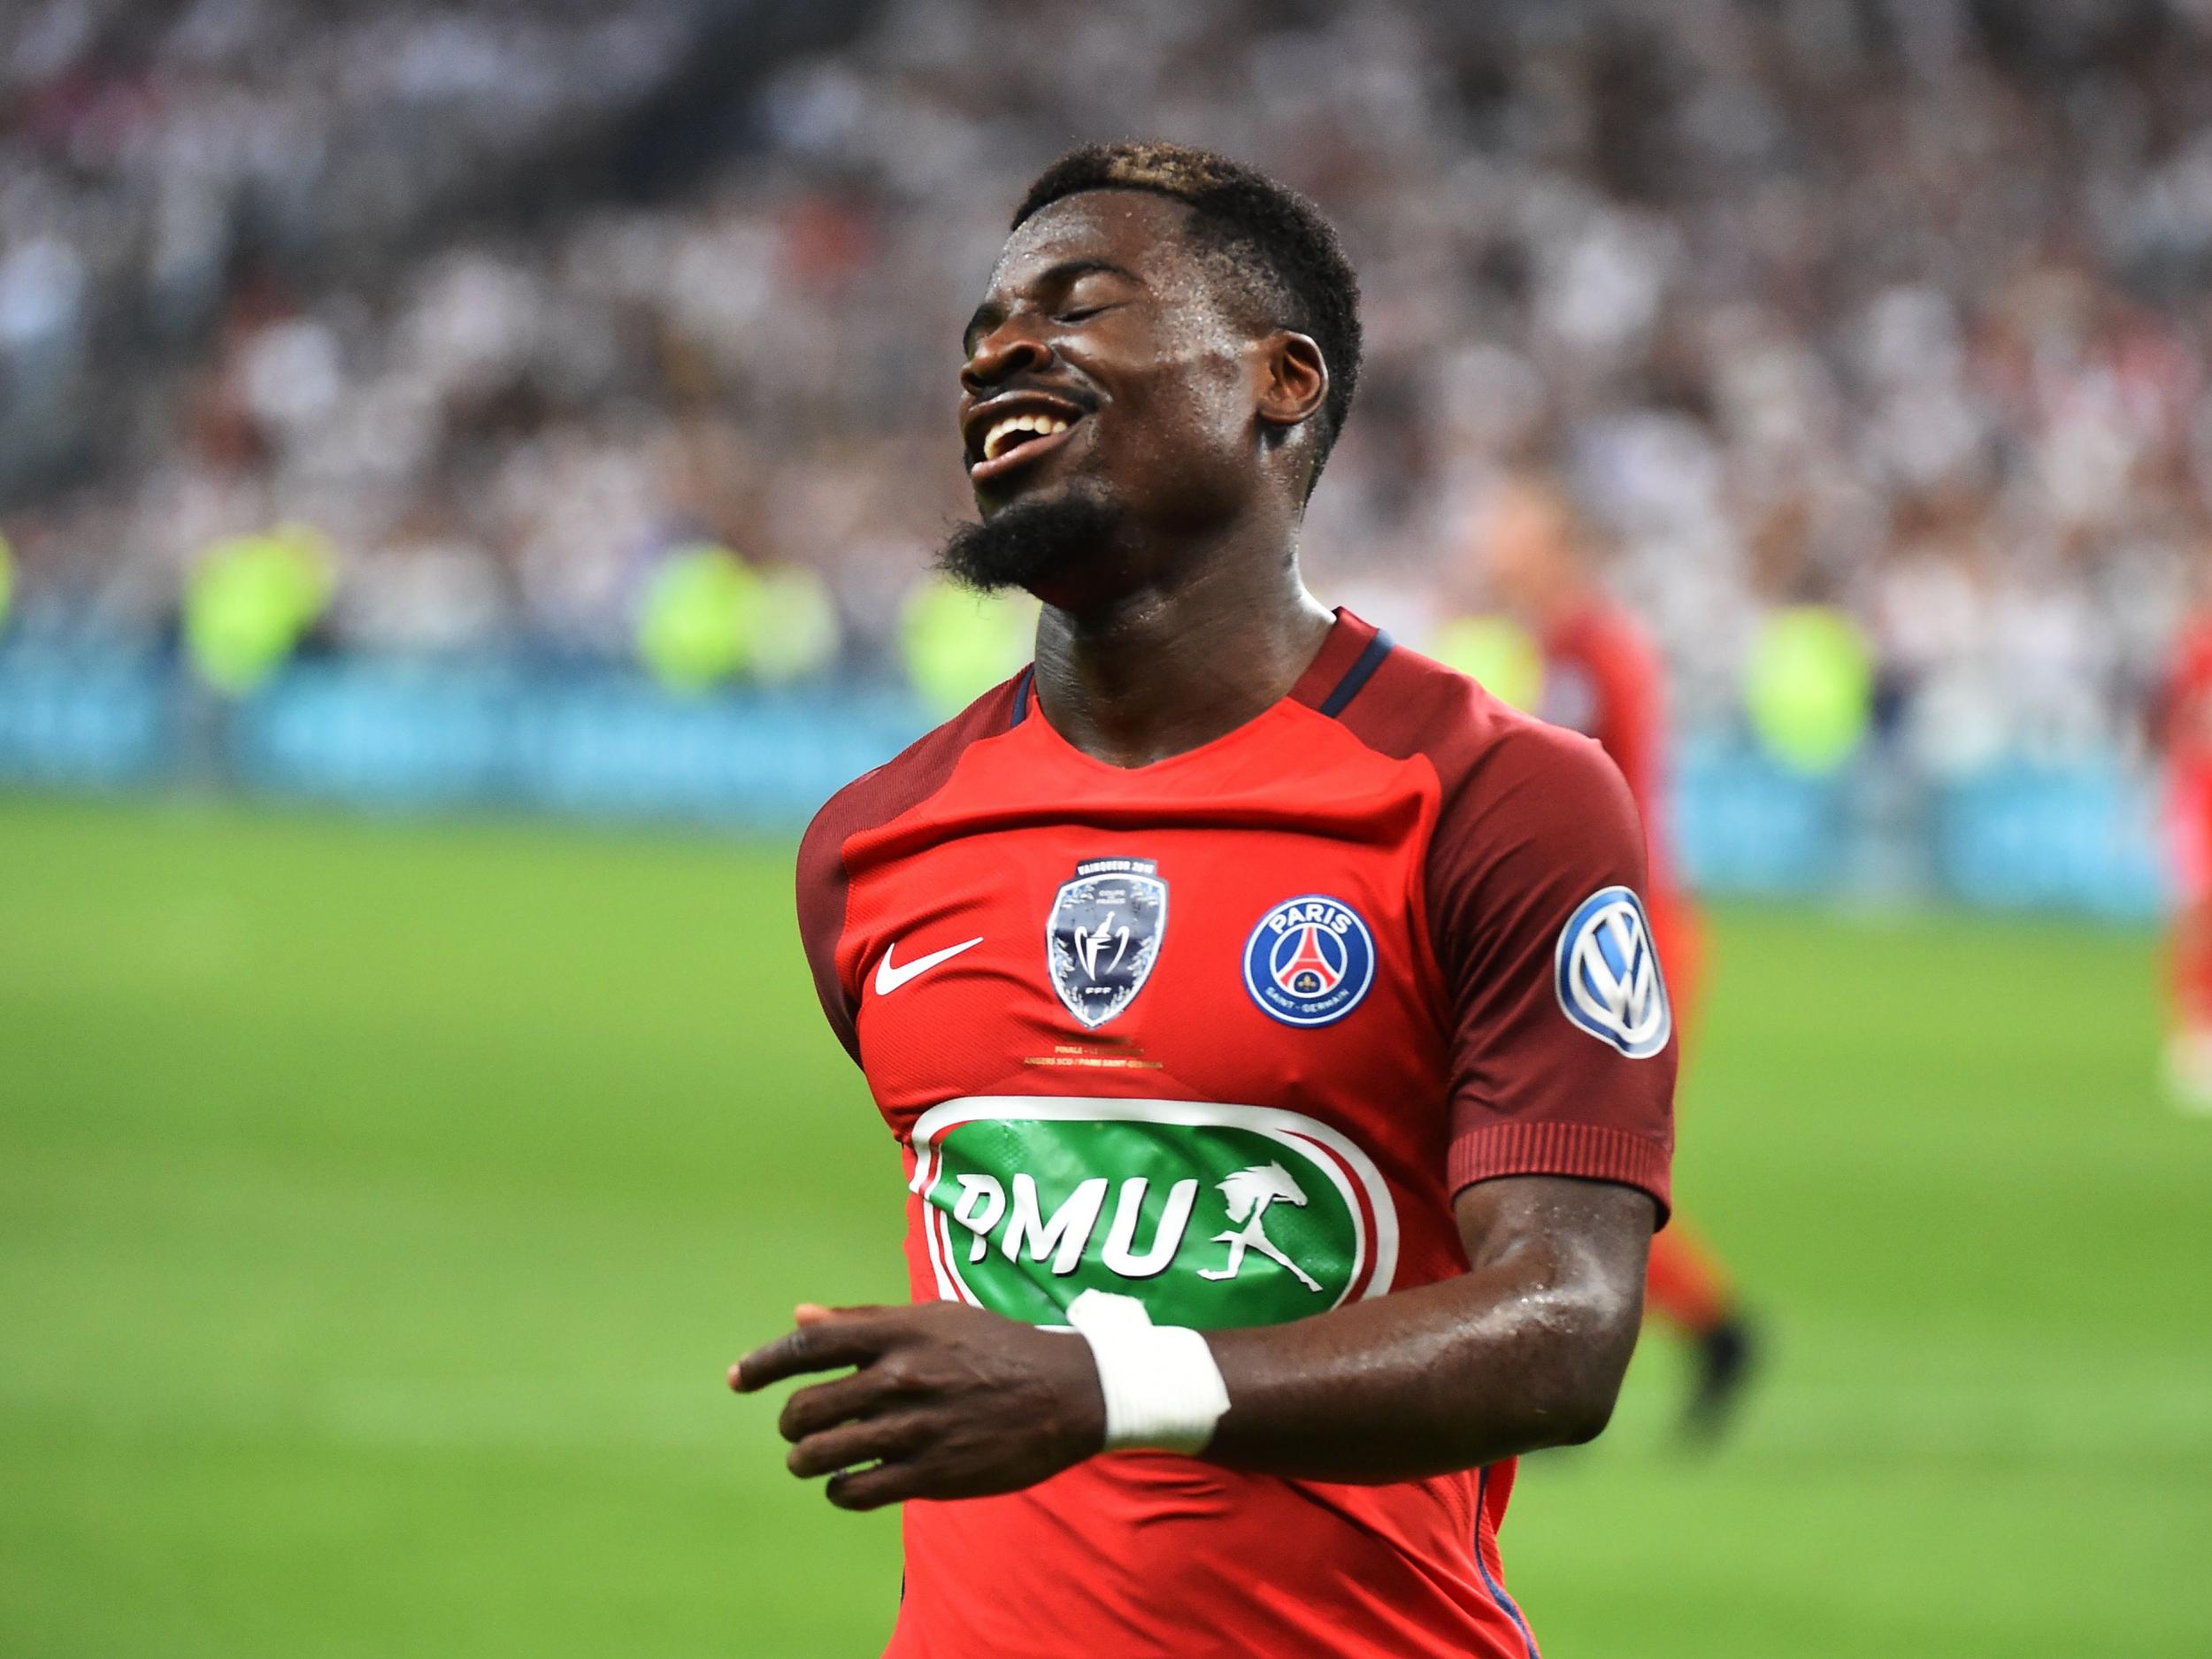 Serge Aurier is appealing against the sentence but that process will not be completed before the end of the transfer window on Thursday